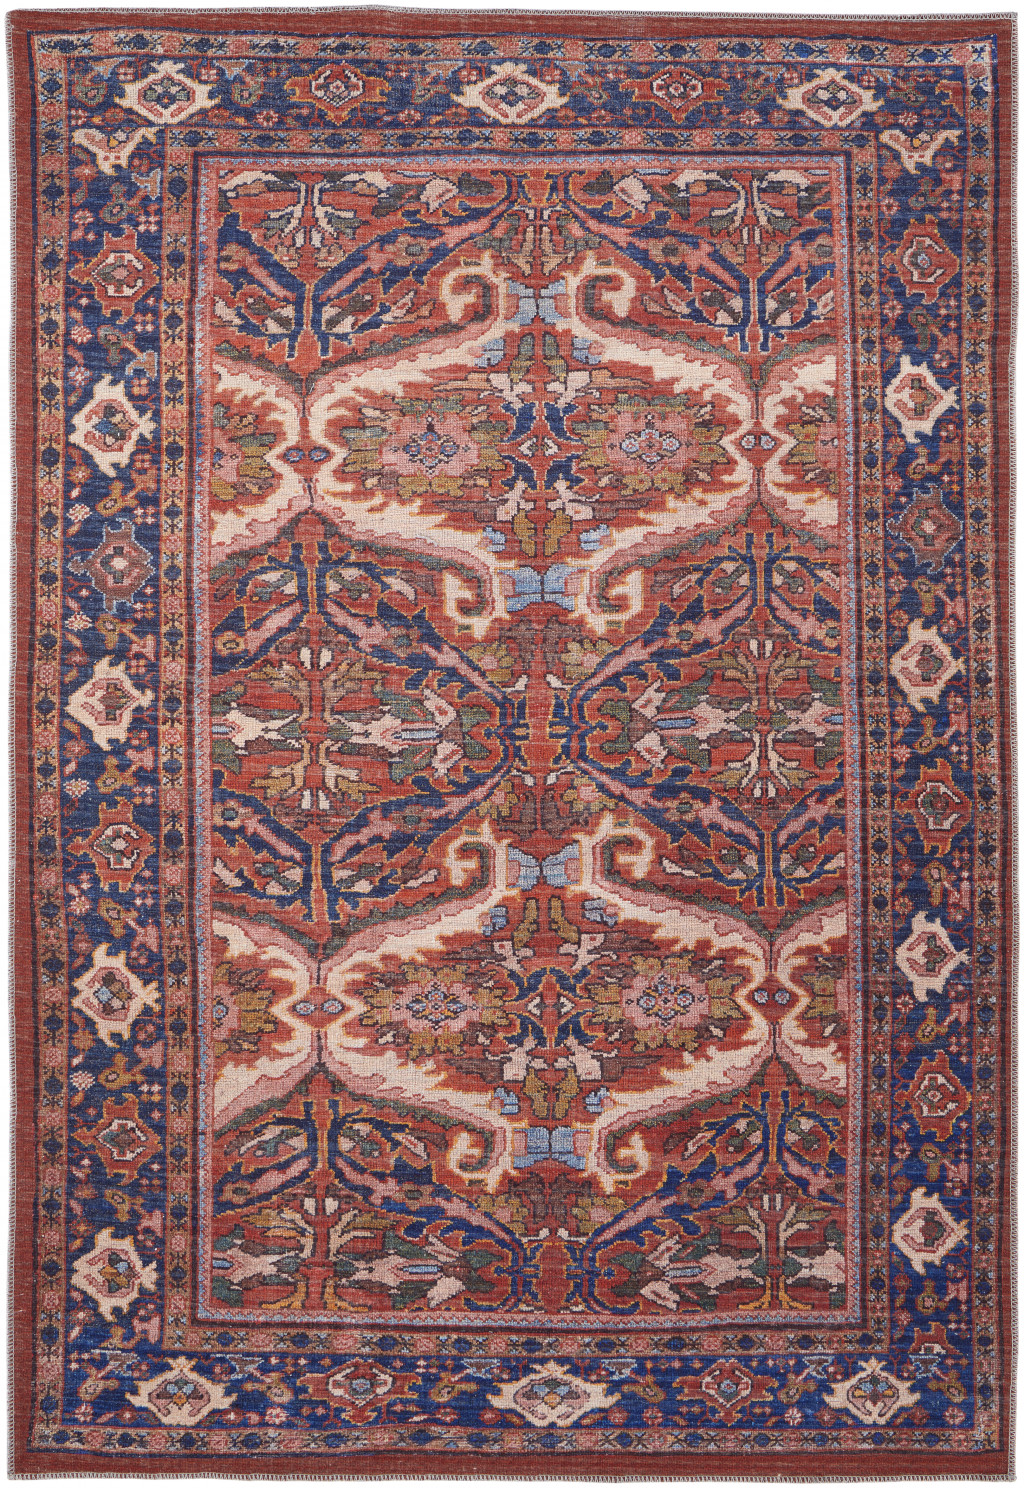 5' X 8' Red Tan And Blue Floral Power Loom Area Rug-515148-1